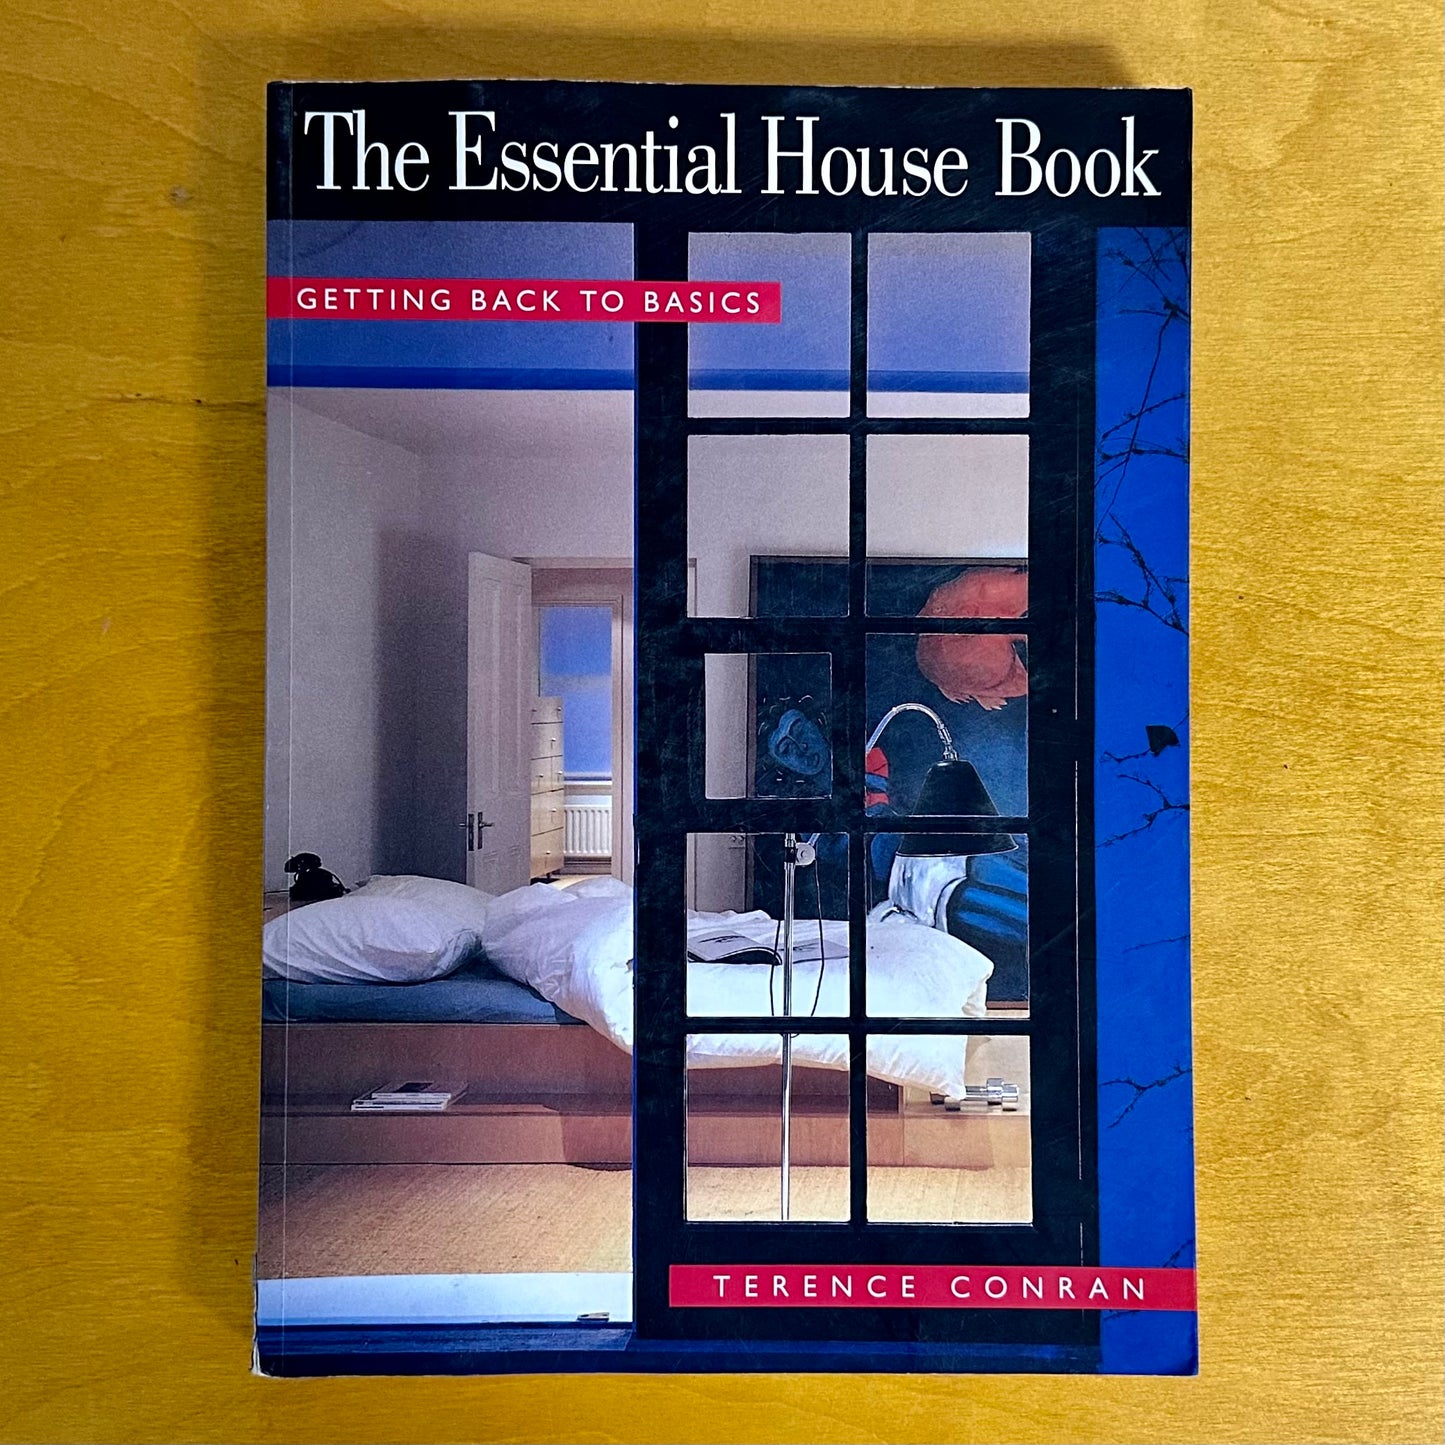 The Essential House Book Getting Back To Basics by Terence Conran, 1994